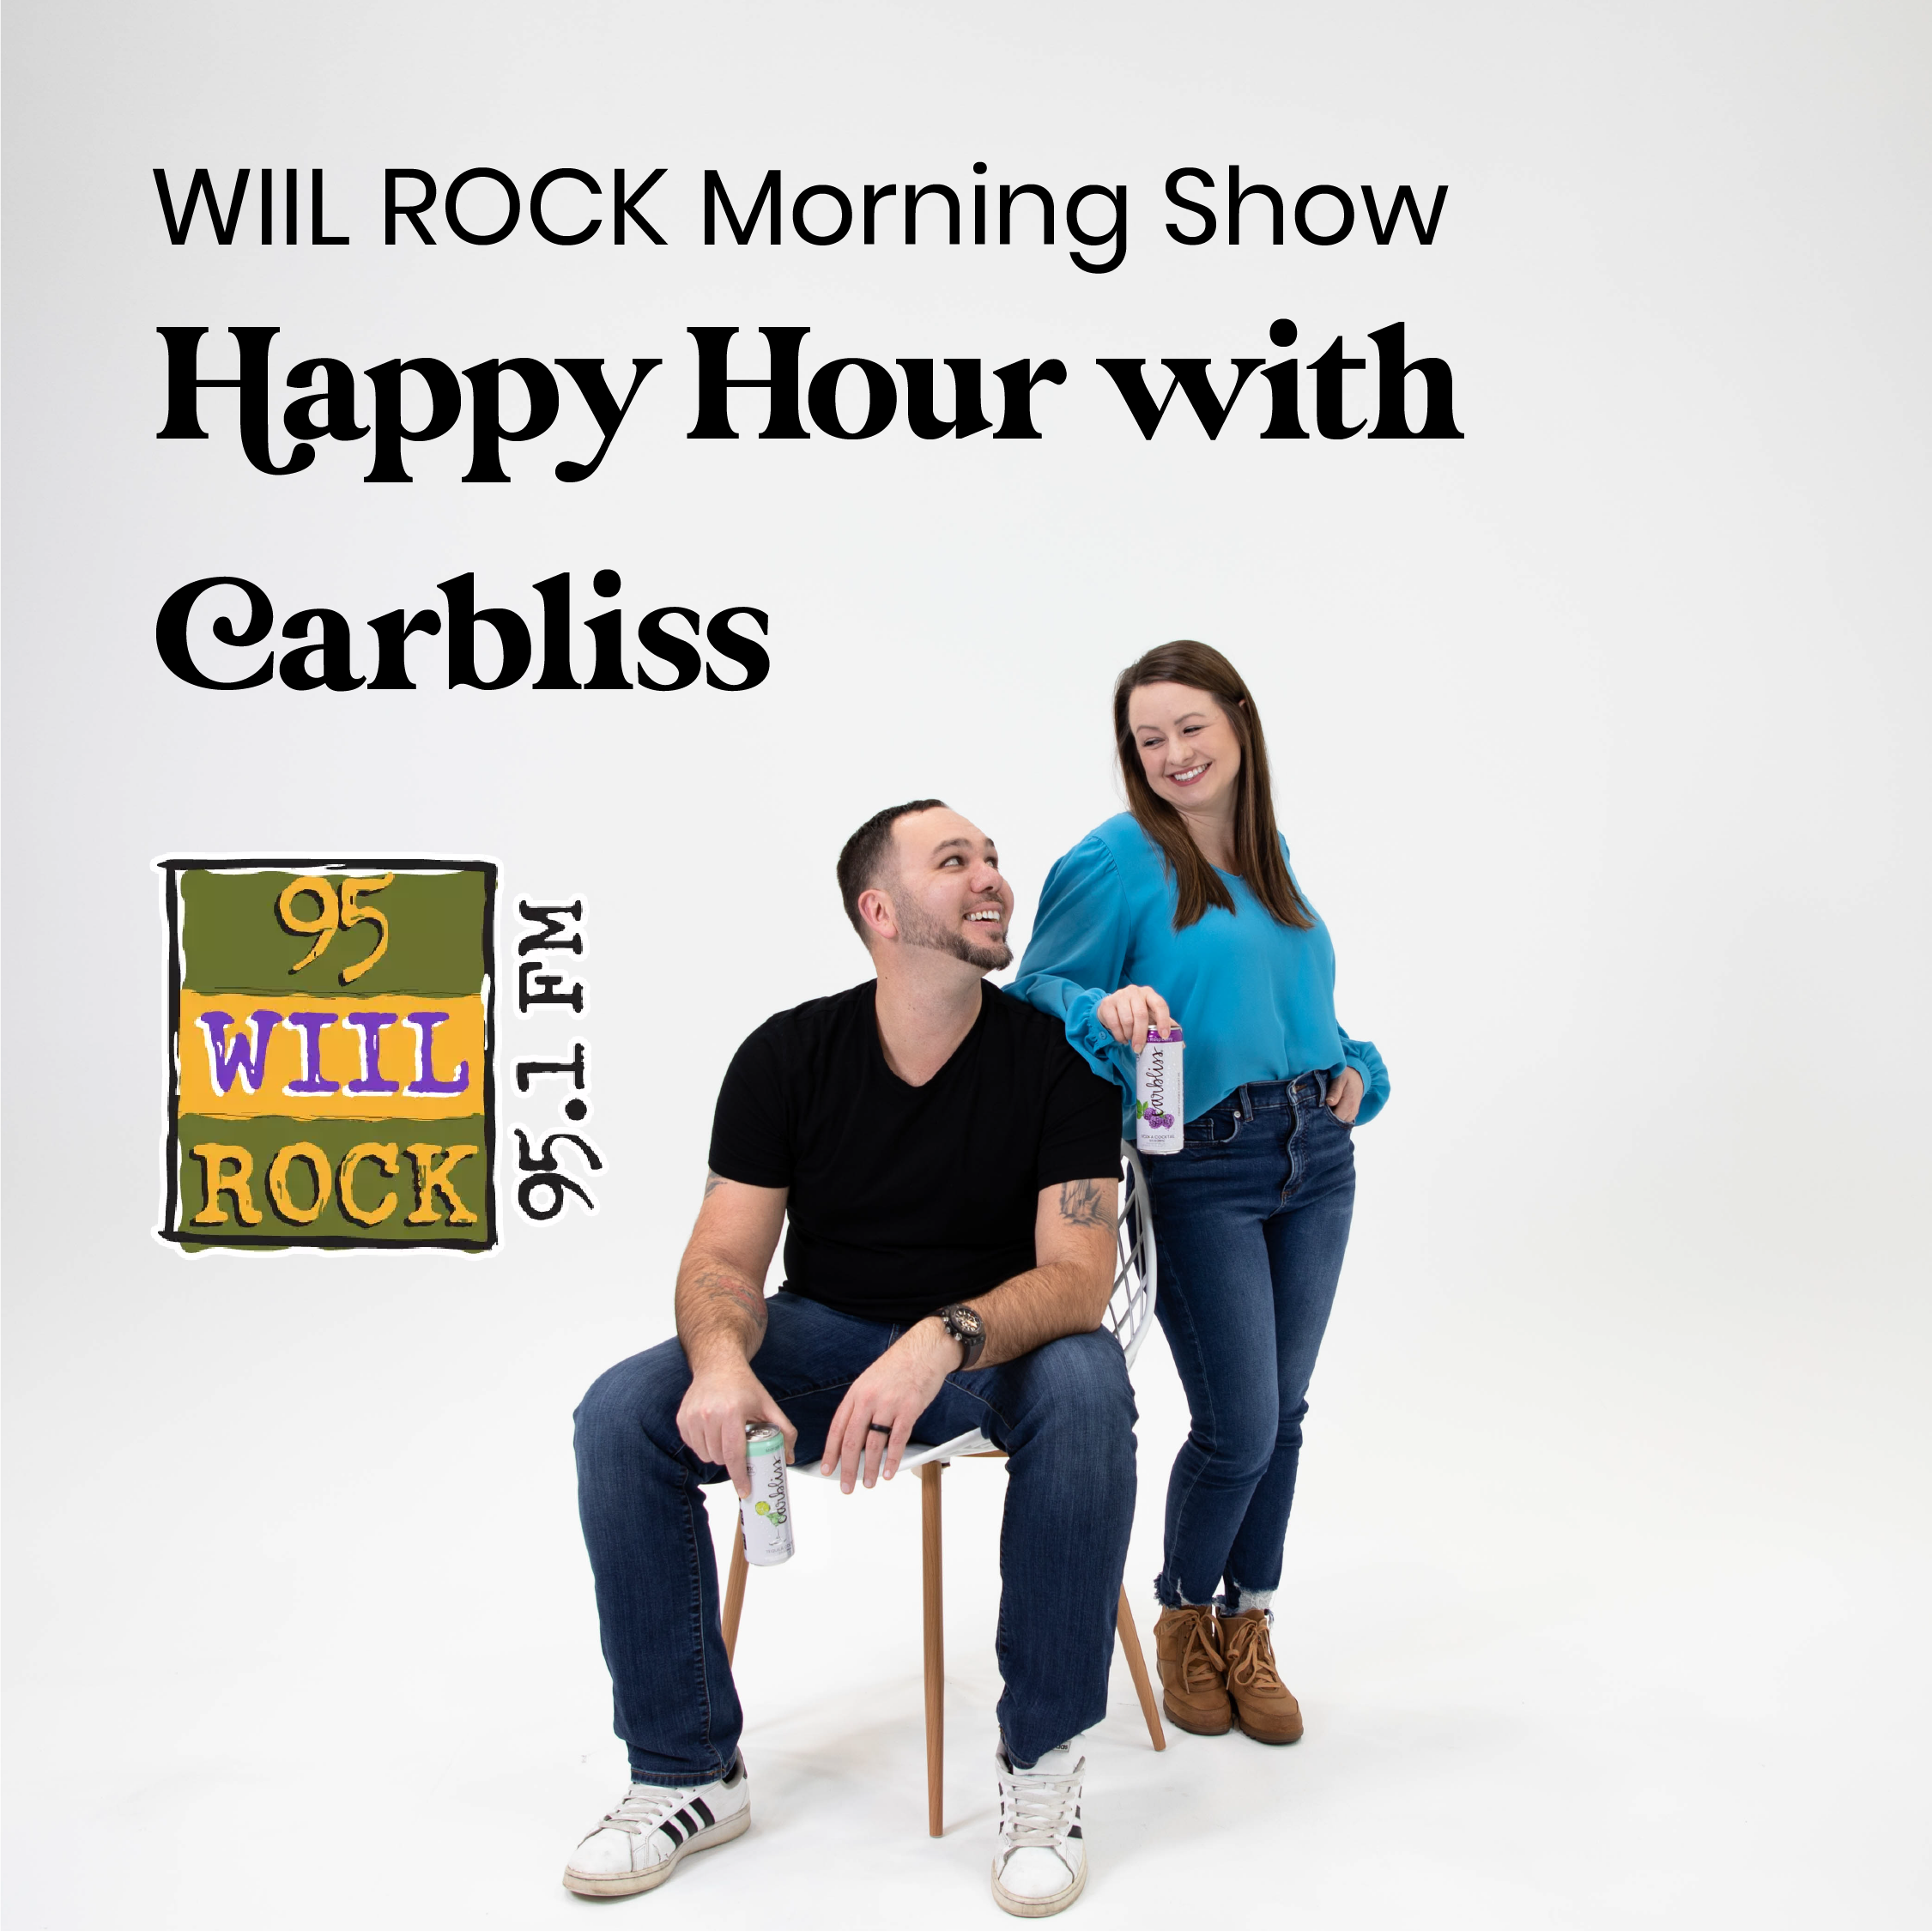 Adam and Amanda Kroener on Happy Hour with Carbliss on the WIIL Rock Morning Show